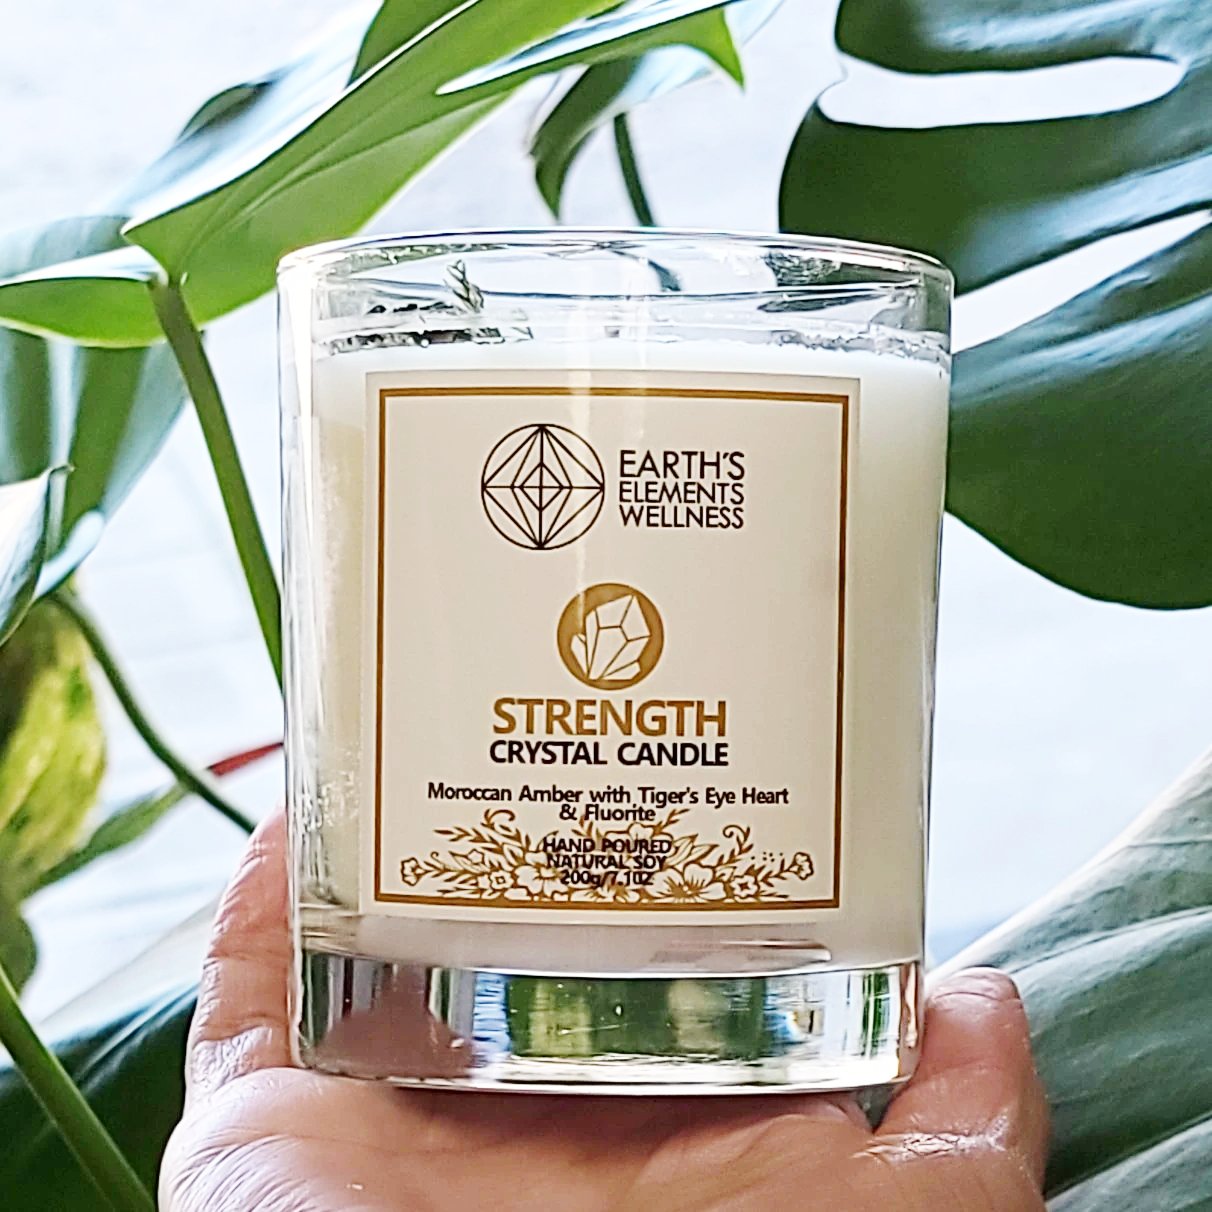 Strength Crystal Candle Scented 7.1oz 200g - Elevated Metaphysical